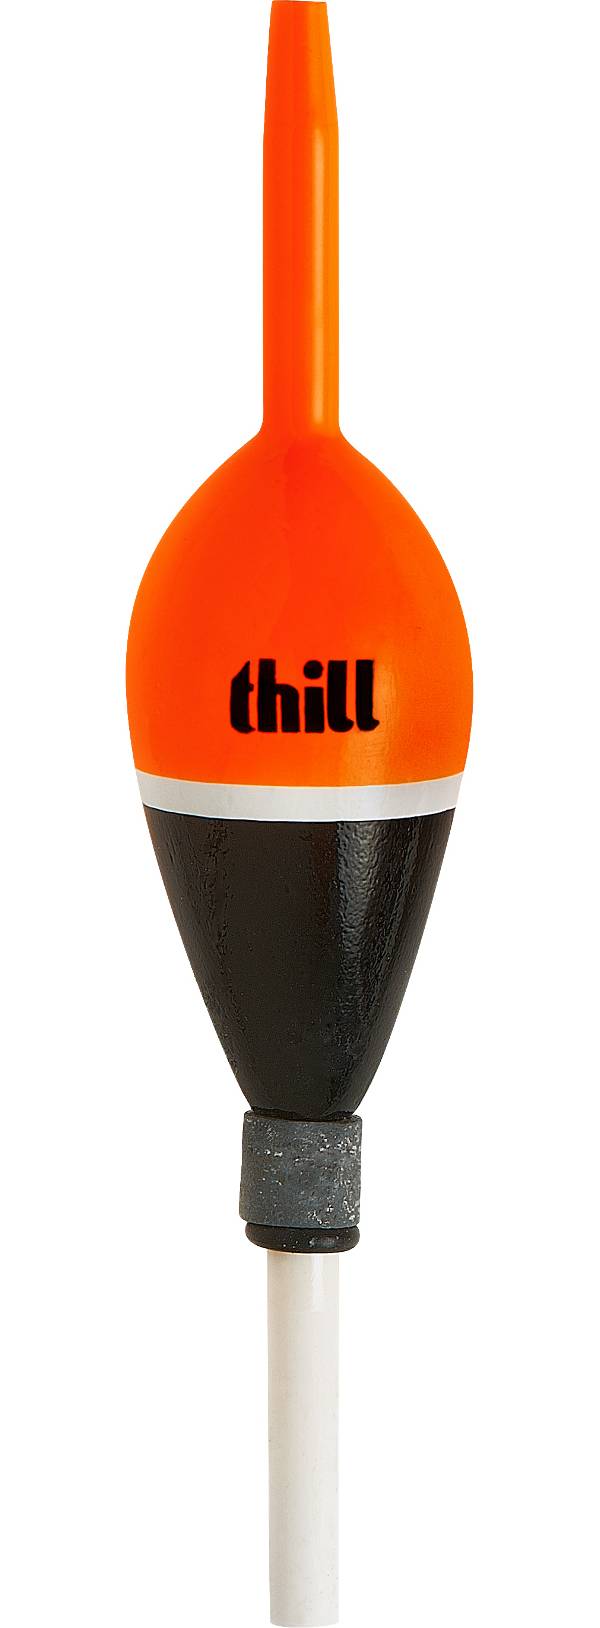 Thill Premium Weighted Floats